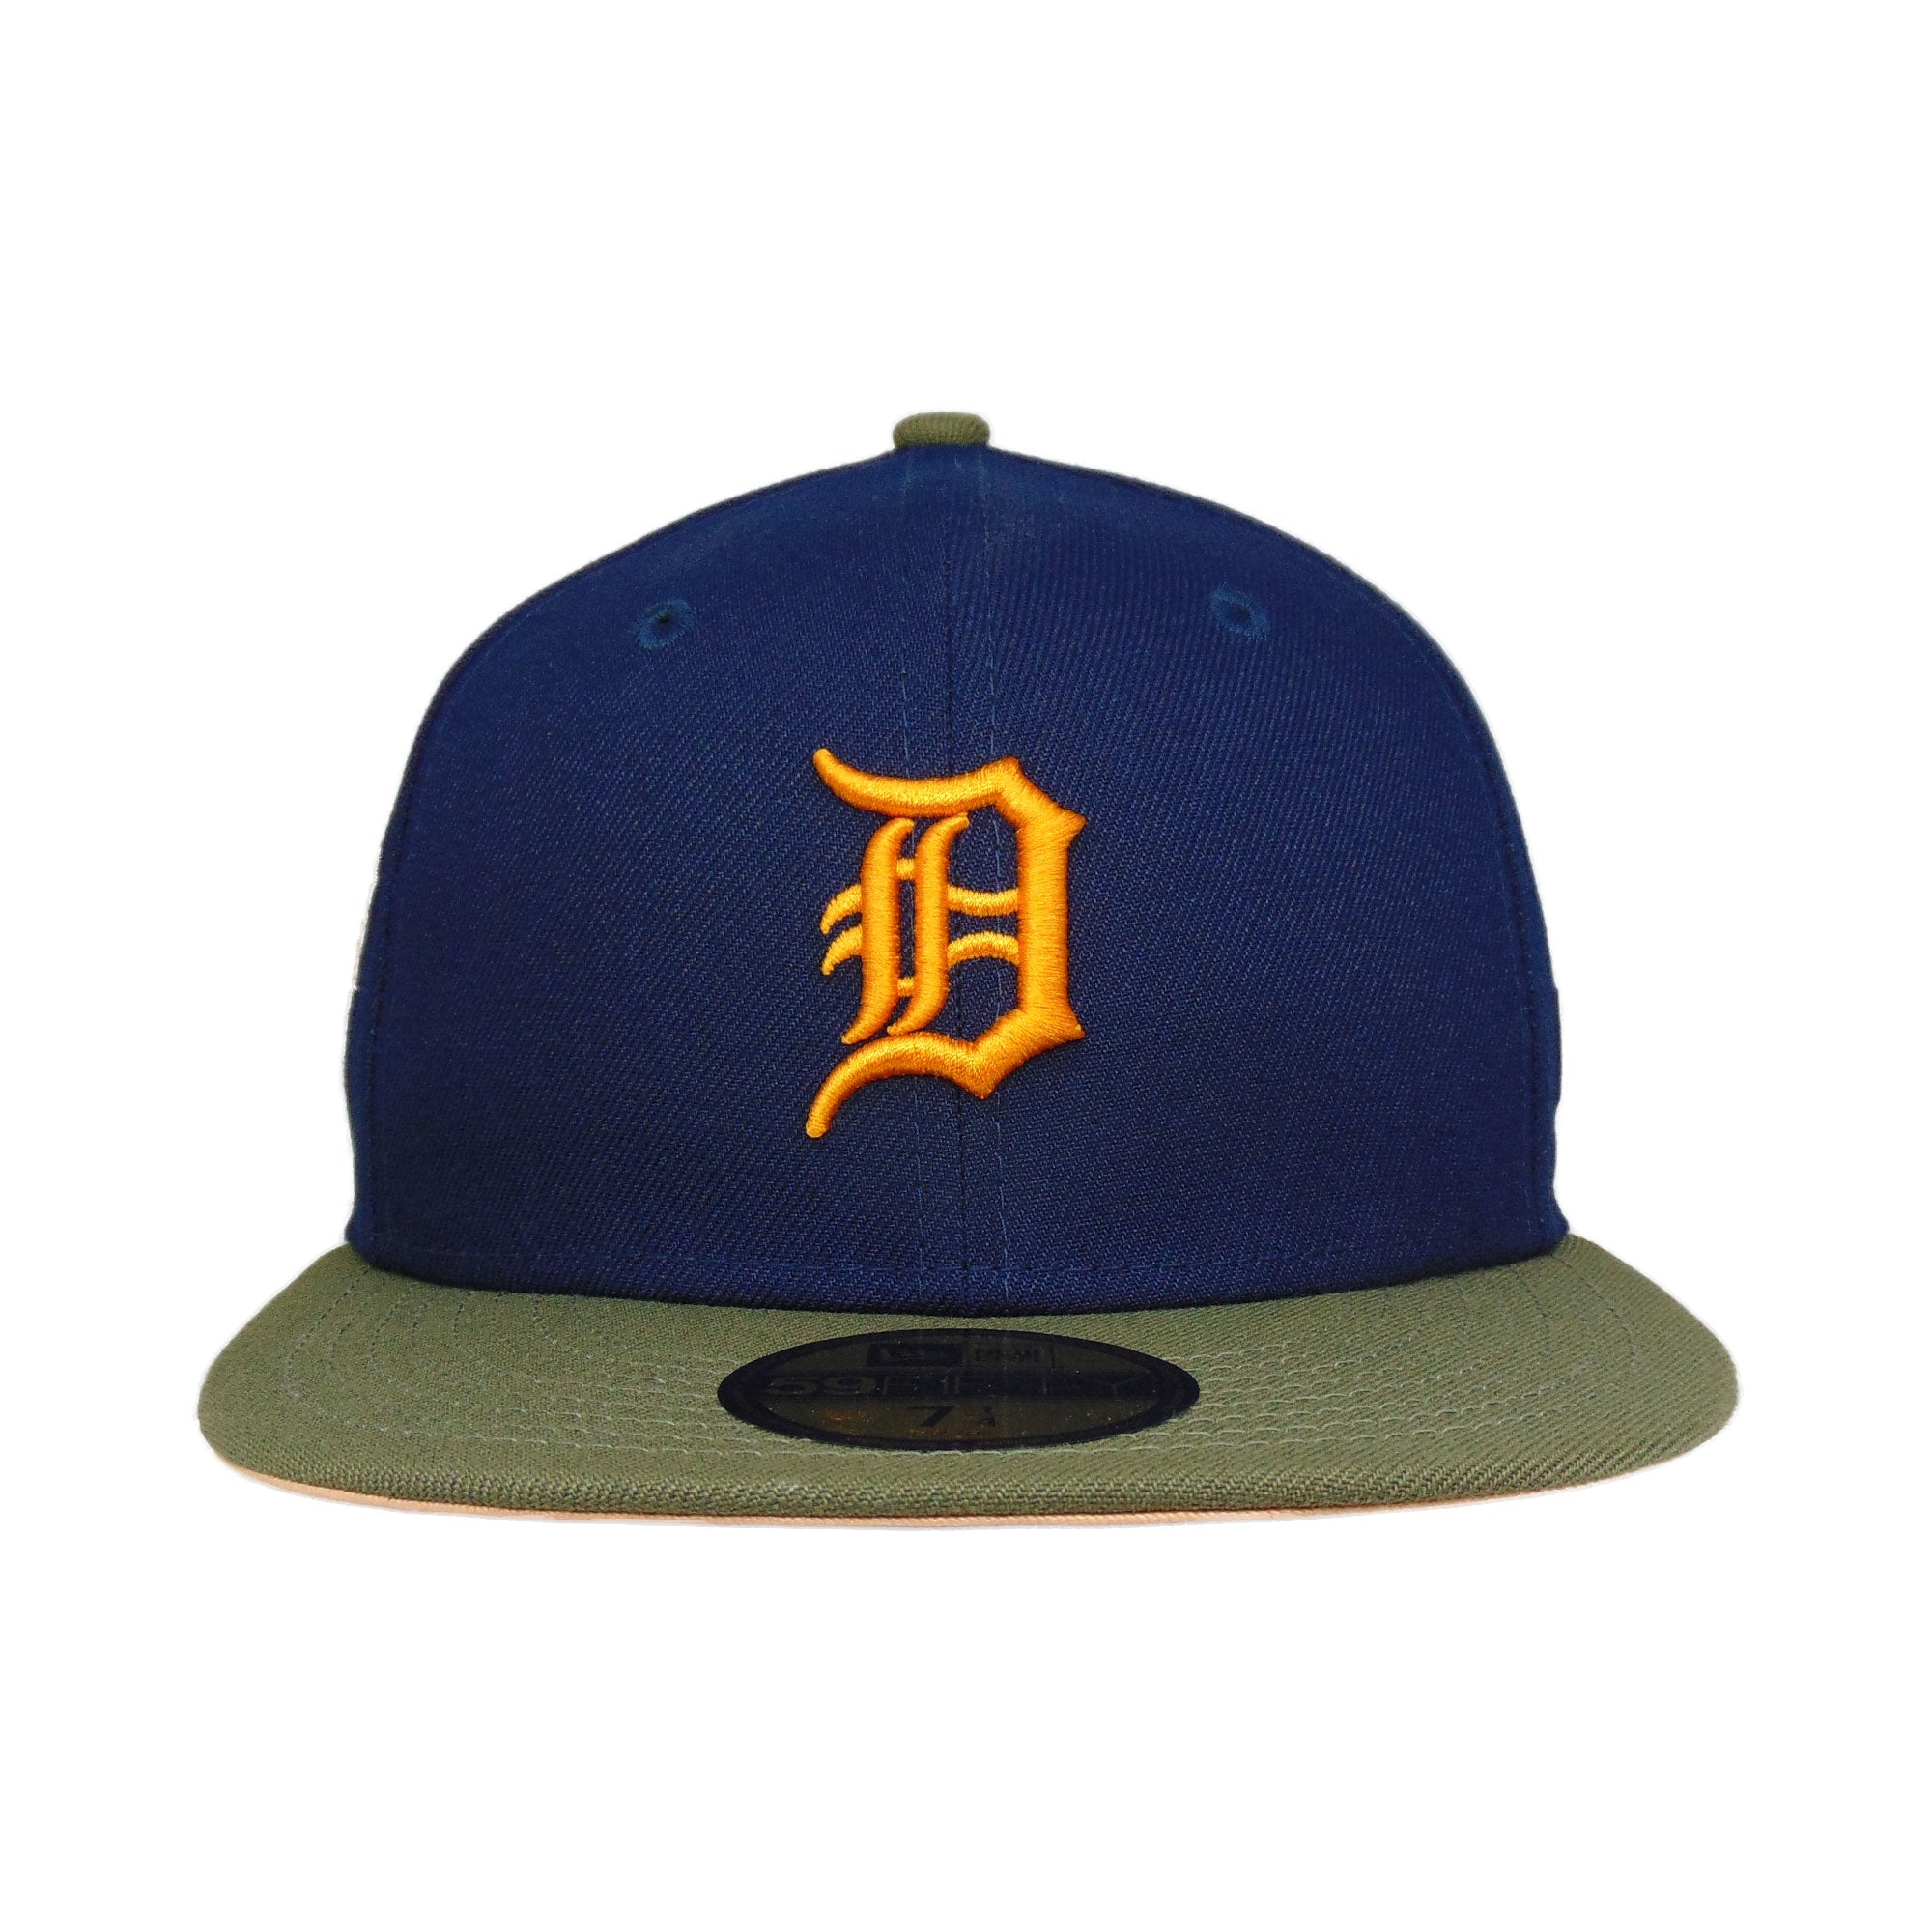 1 Spot for All Authentic Wear and Discover the Custom Fitted Hats  Sports  World 165